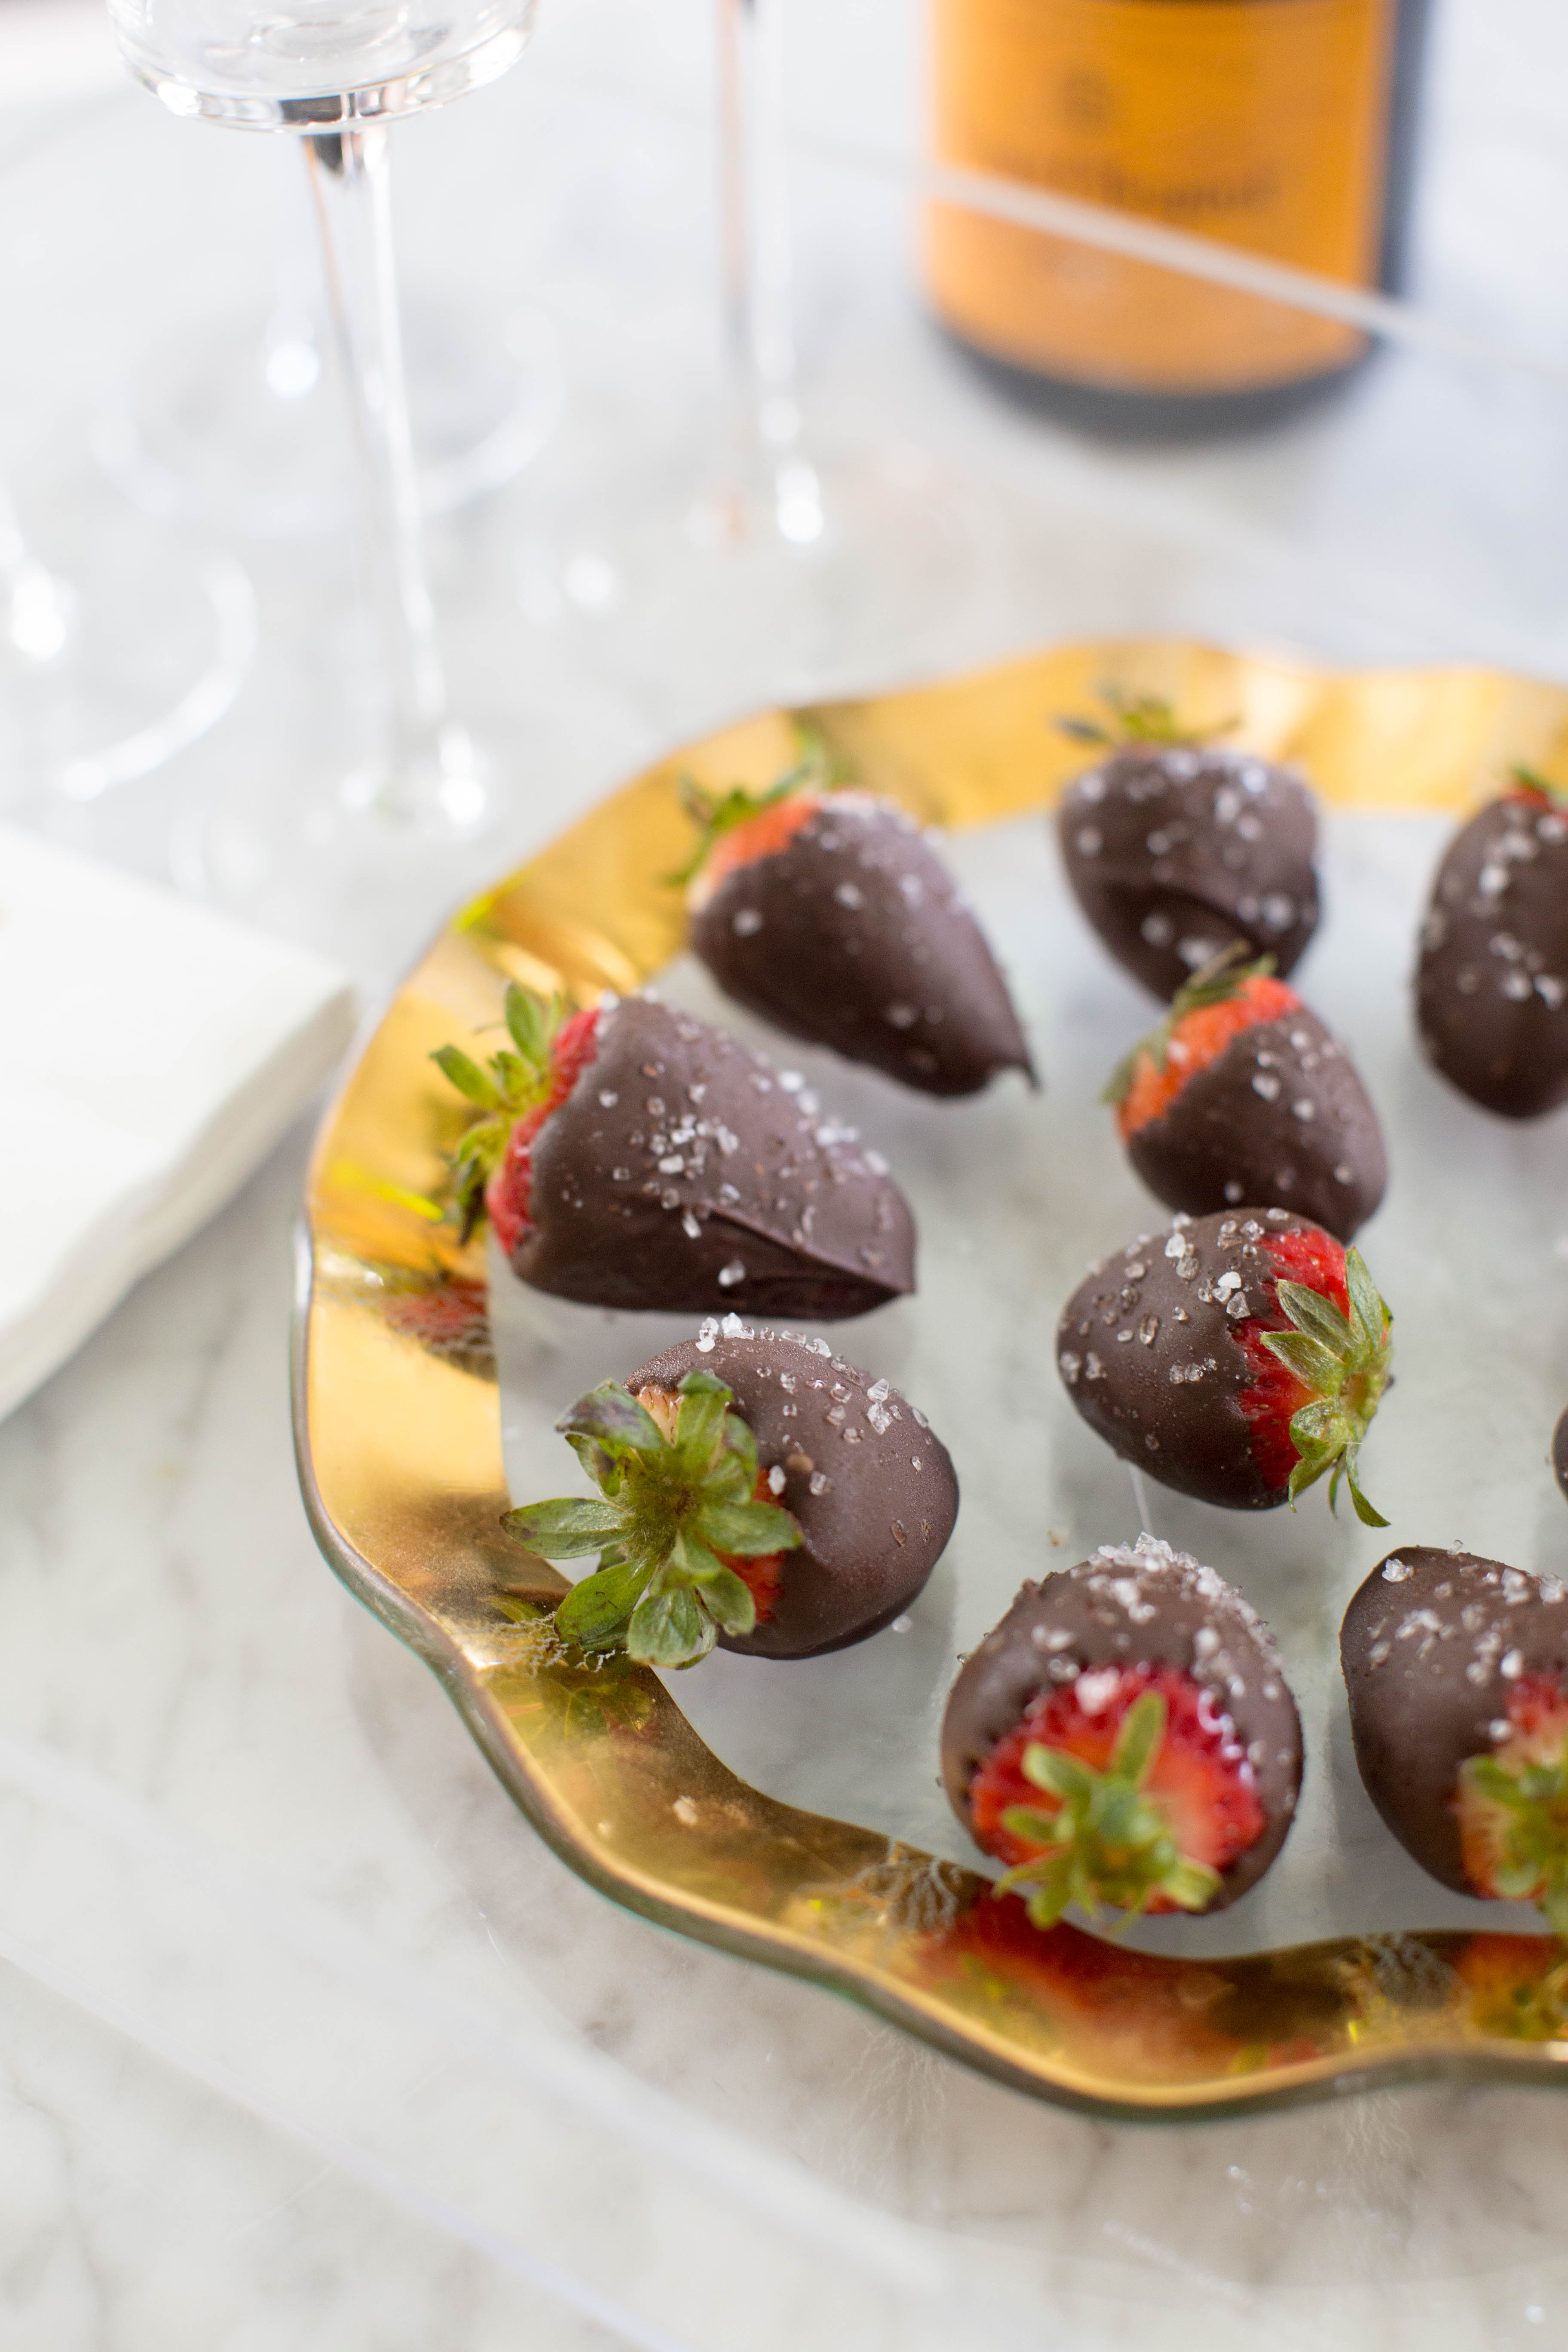 Decadent Champagne Soaked Salted Chocolate Strawberries by NC lifestyle blogger Amy of Coffee Beans and Bobby Pins